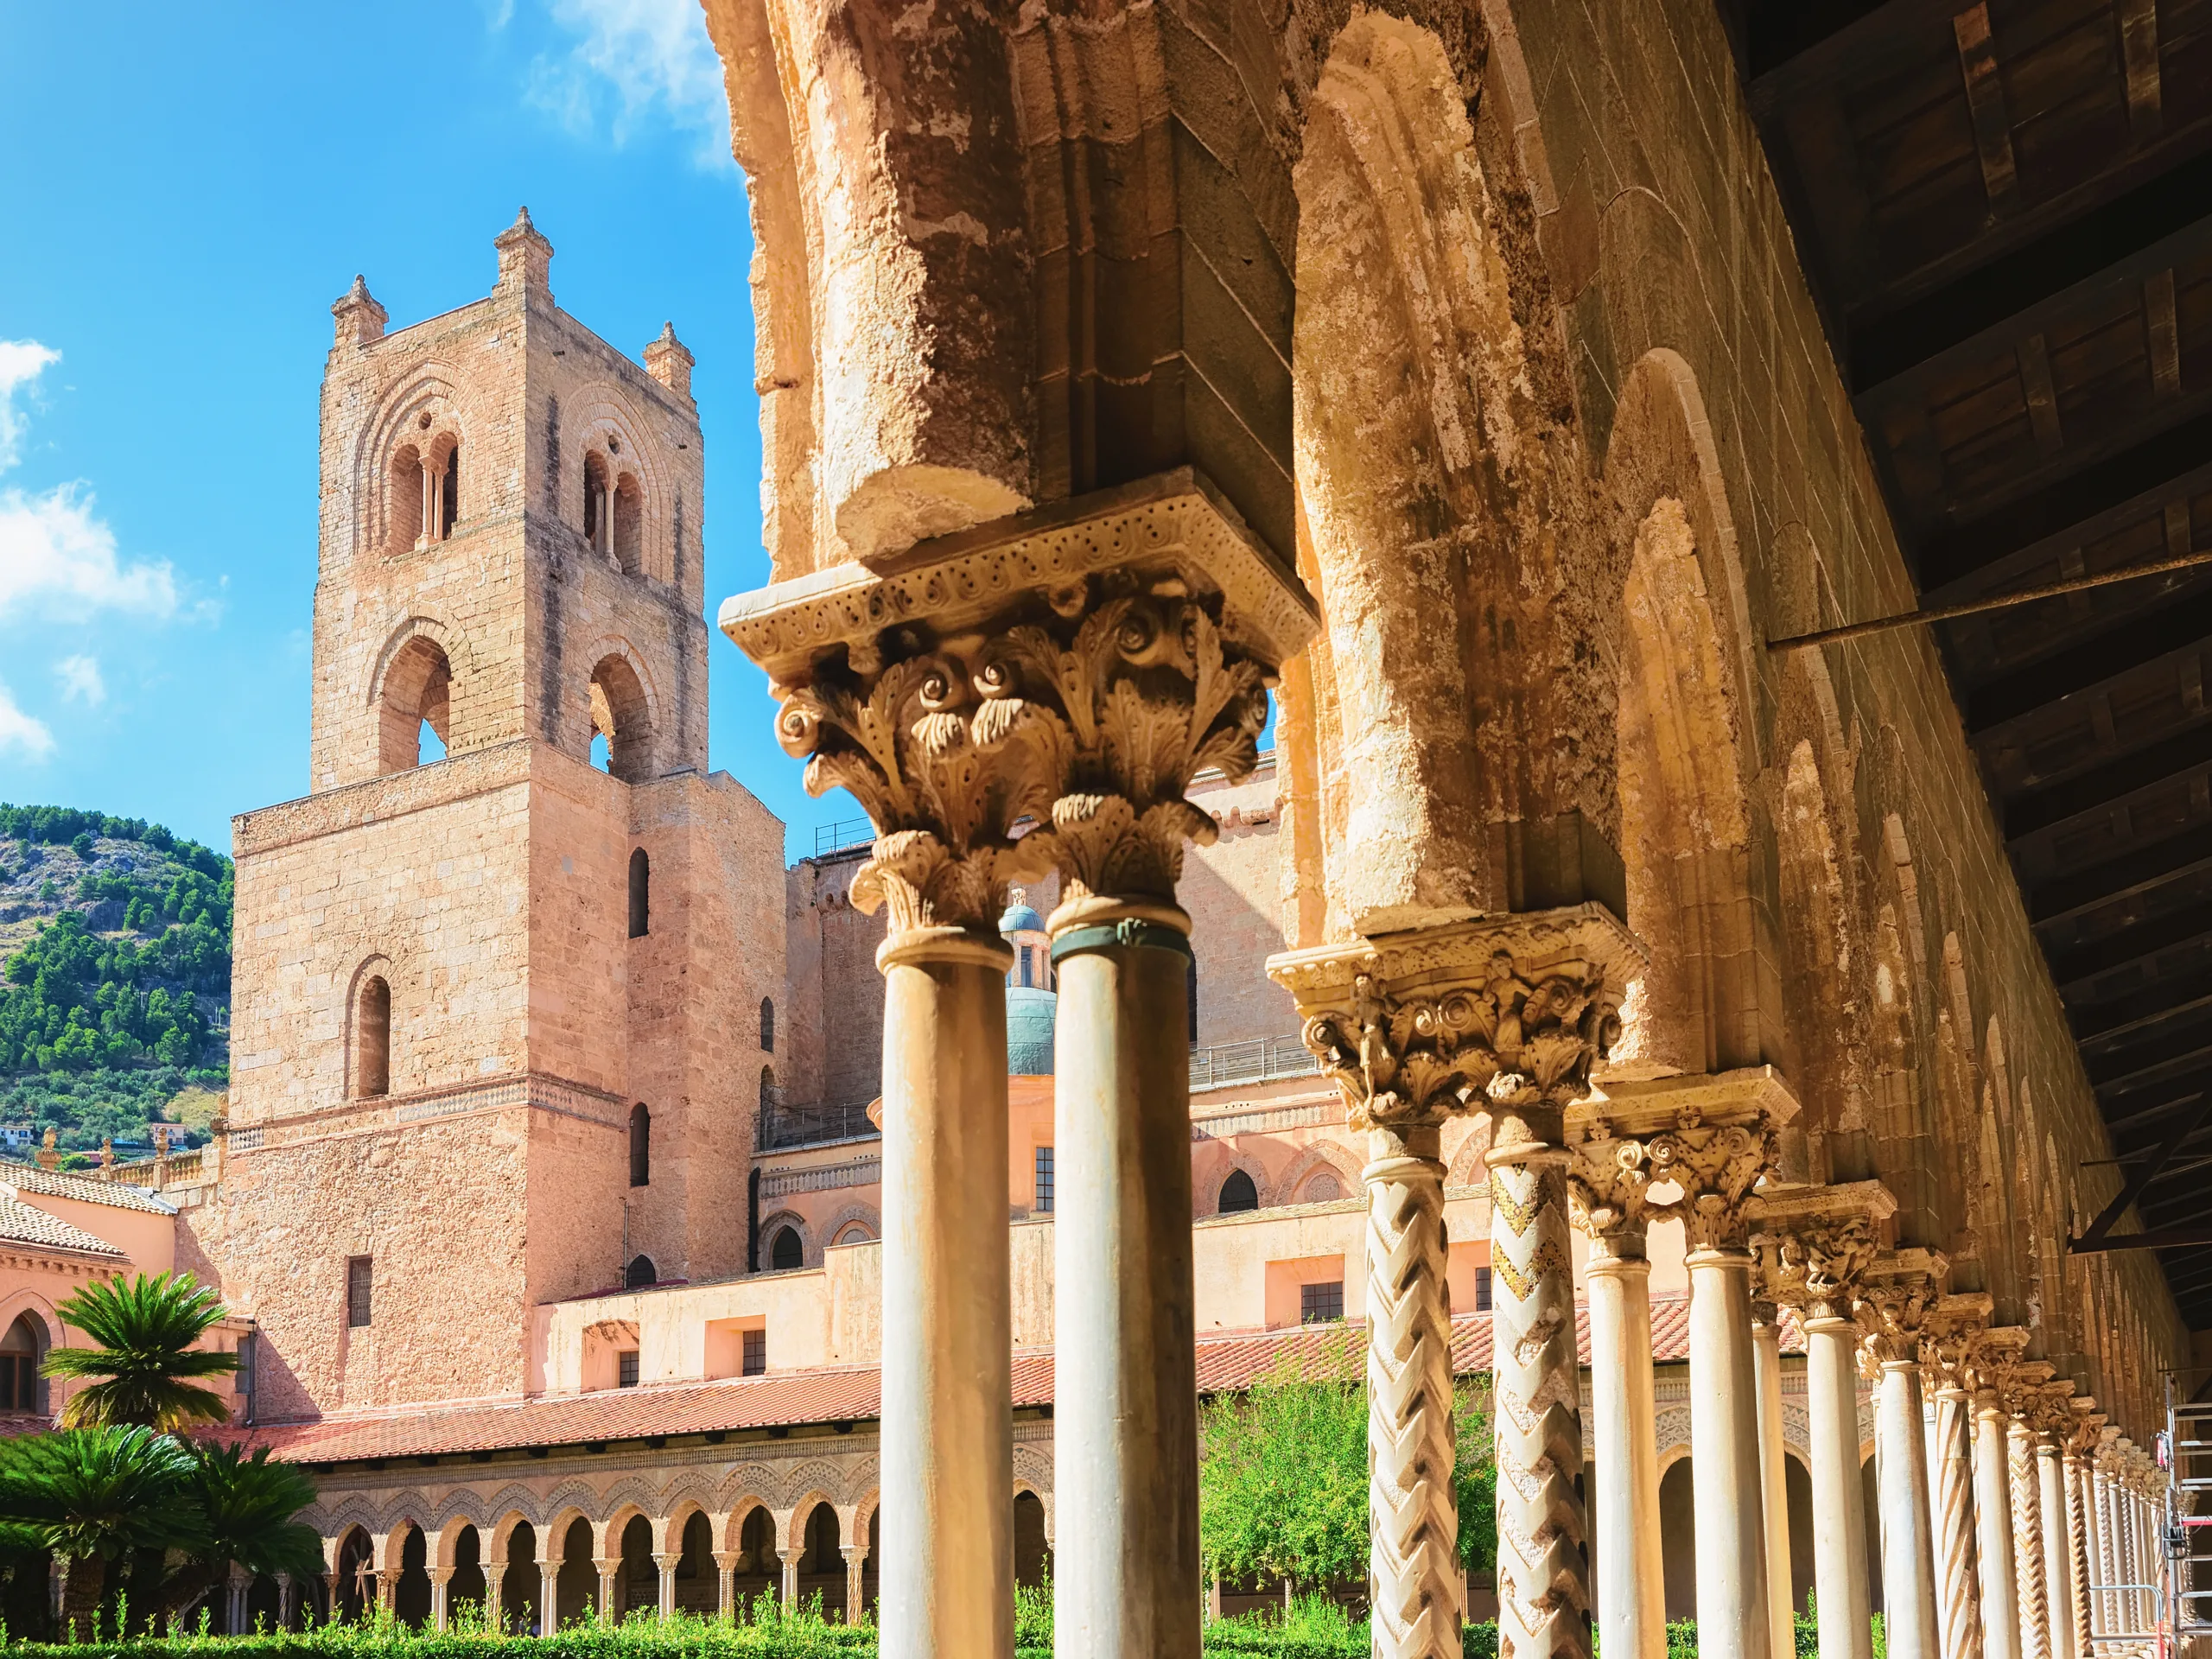 Columns in the garden at Monreale Cathedral, Sicily, Italy